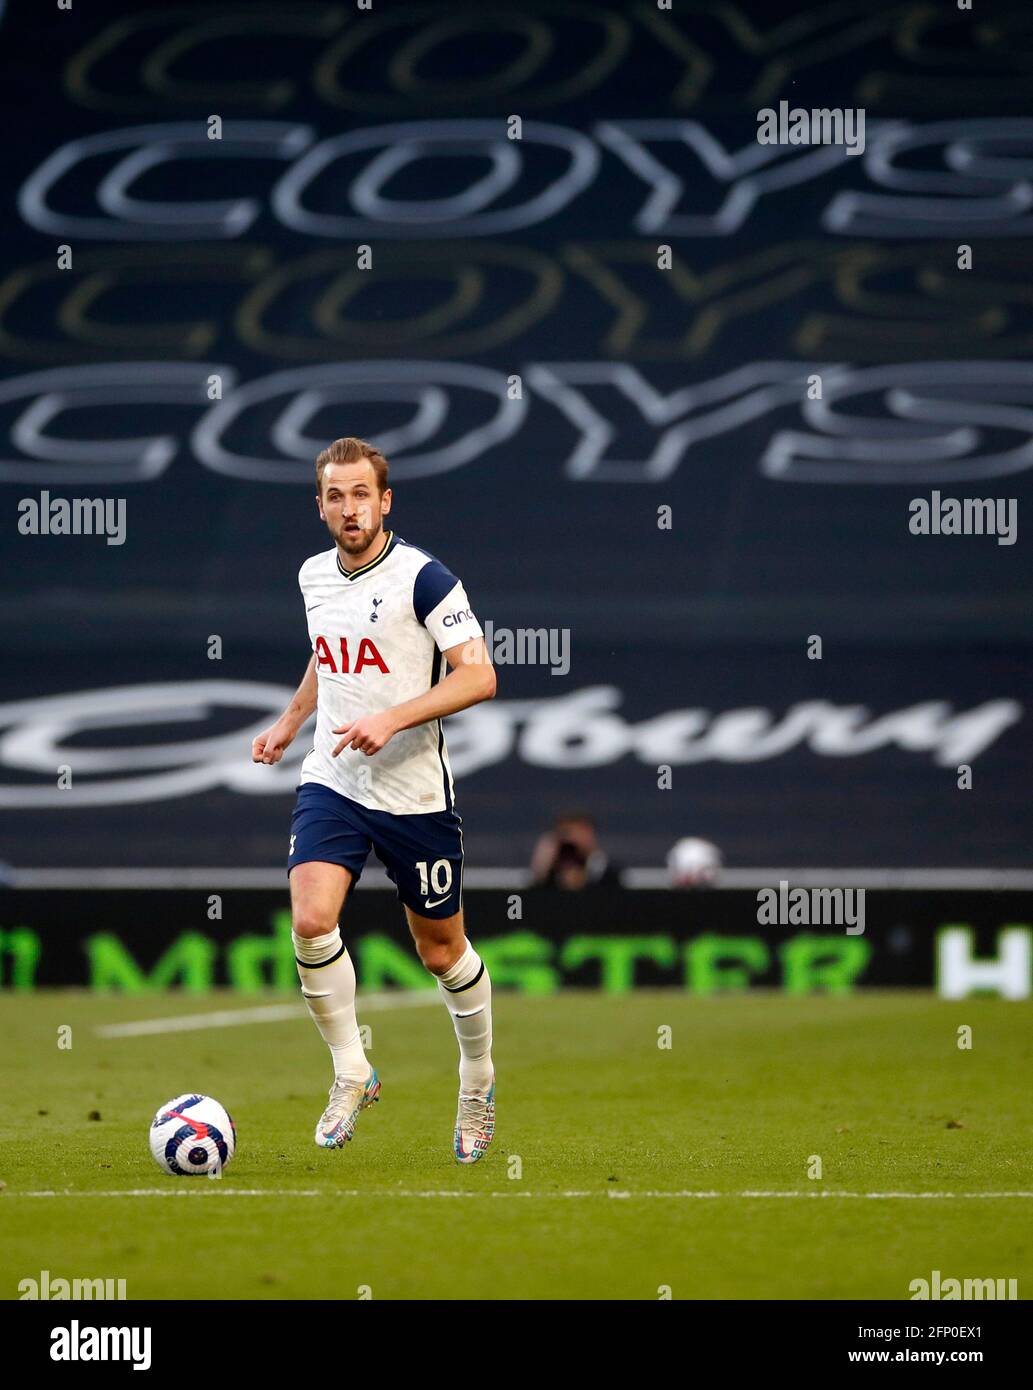 Tottenham Hotspur's Harry Kane during the Premier League match at the Tottenham Hotspur Stadium, London. Picture date: Wednesday May 19, 2021. Stock Photo